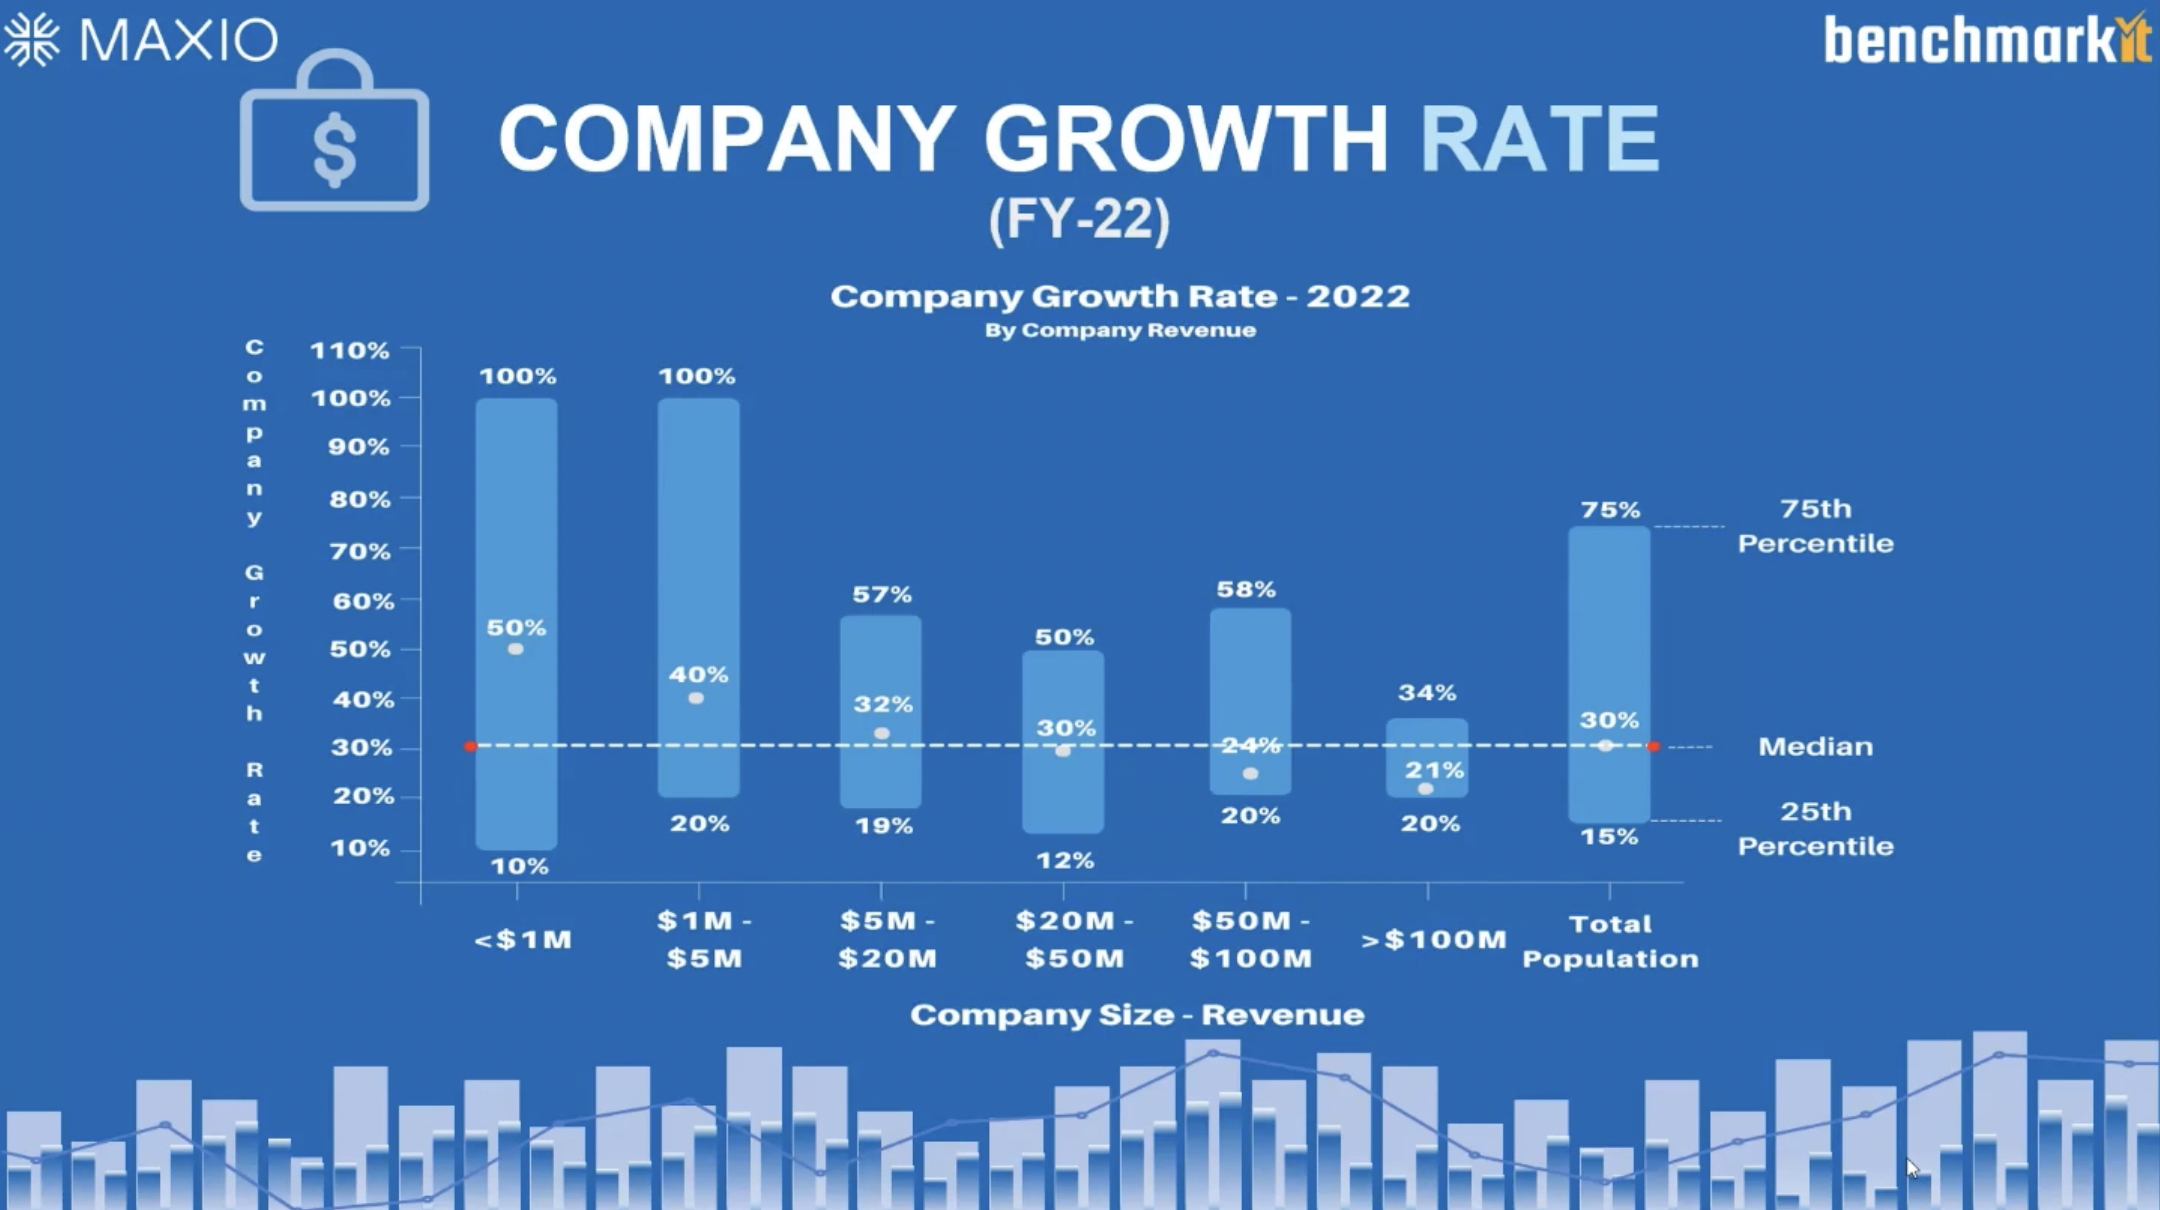 Maxio and Benchmarkit's FY-2022 Company Growth Rates chart